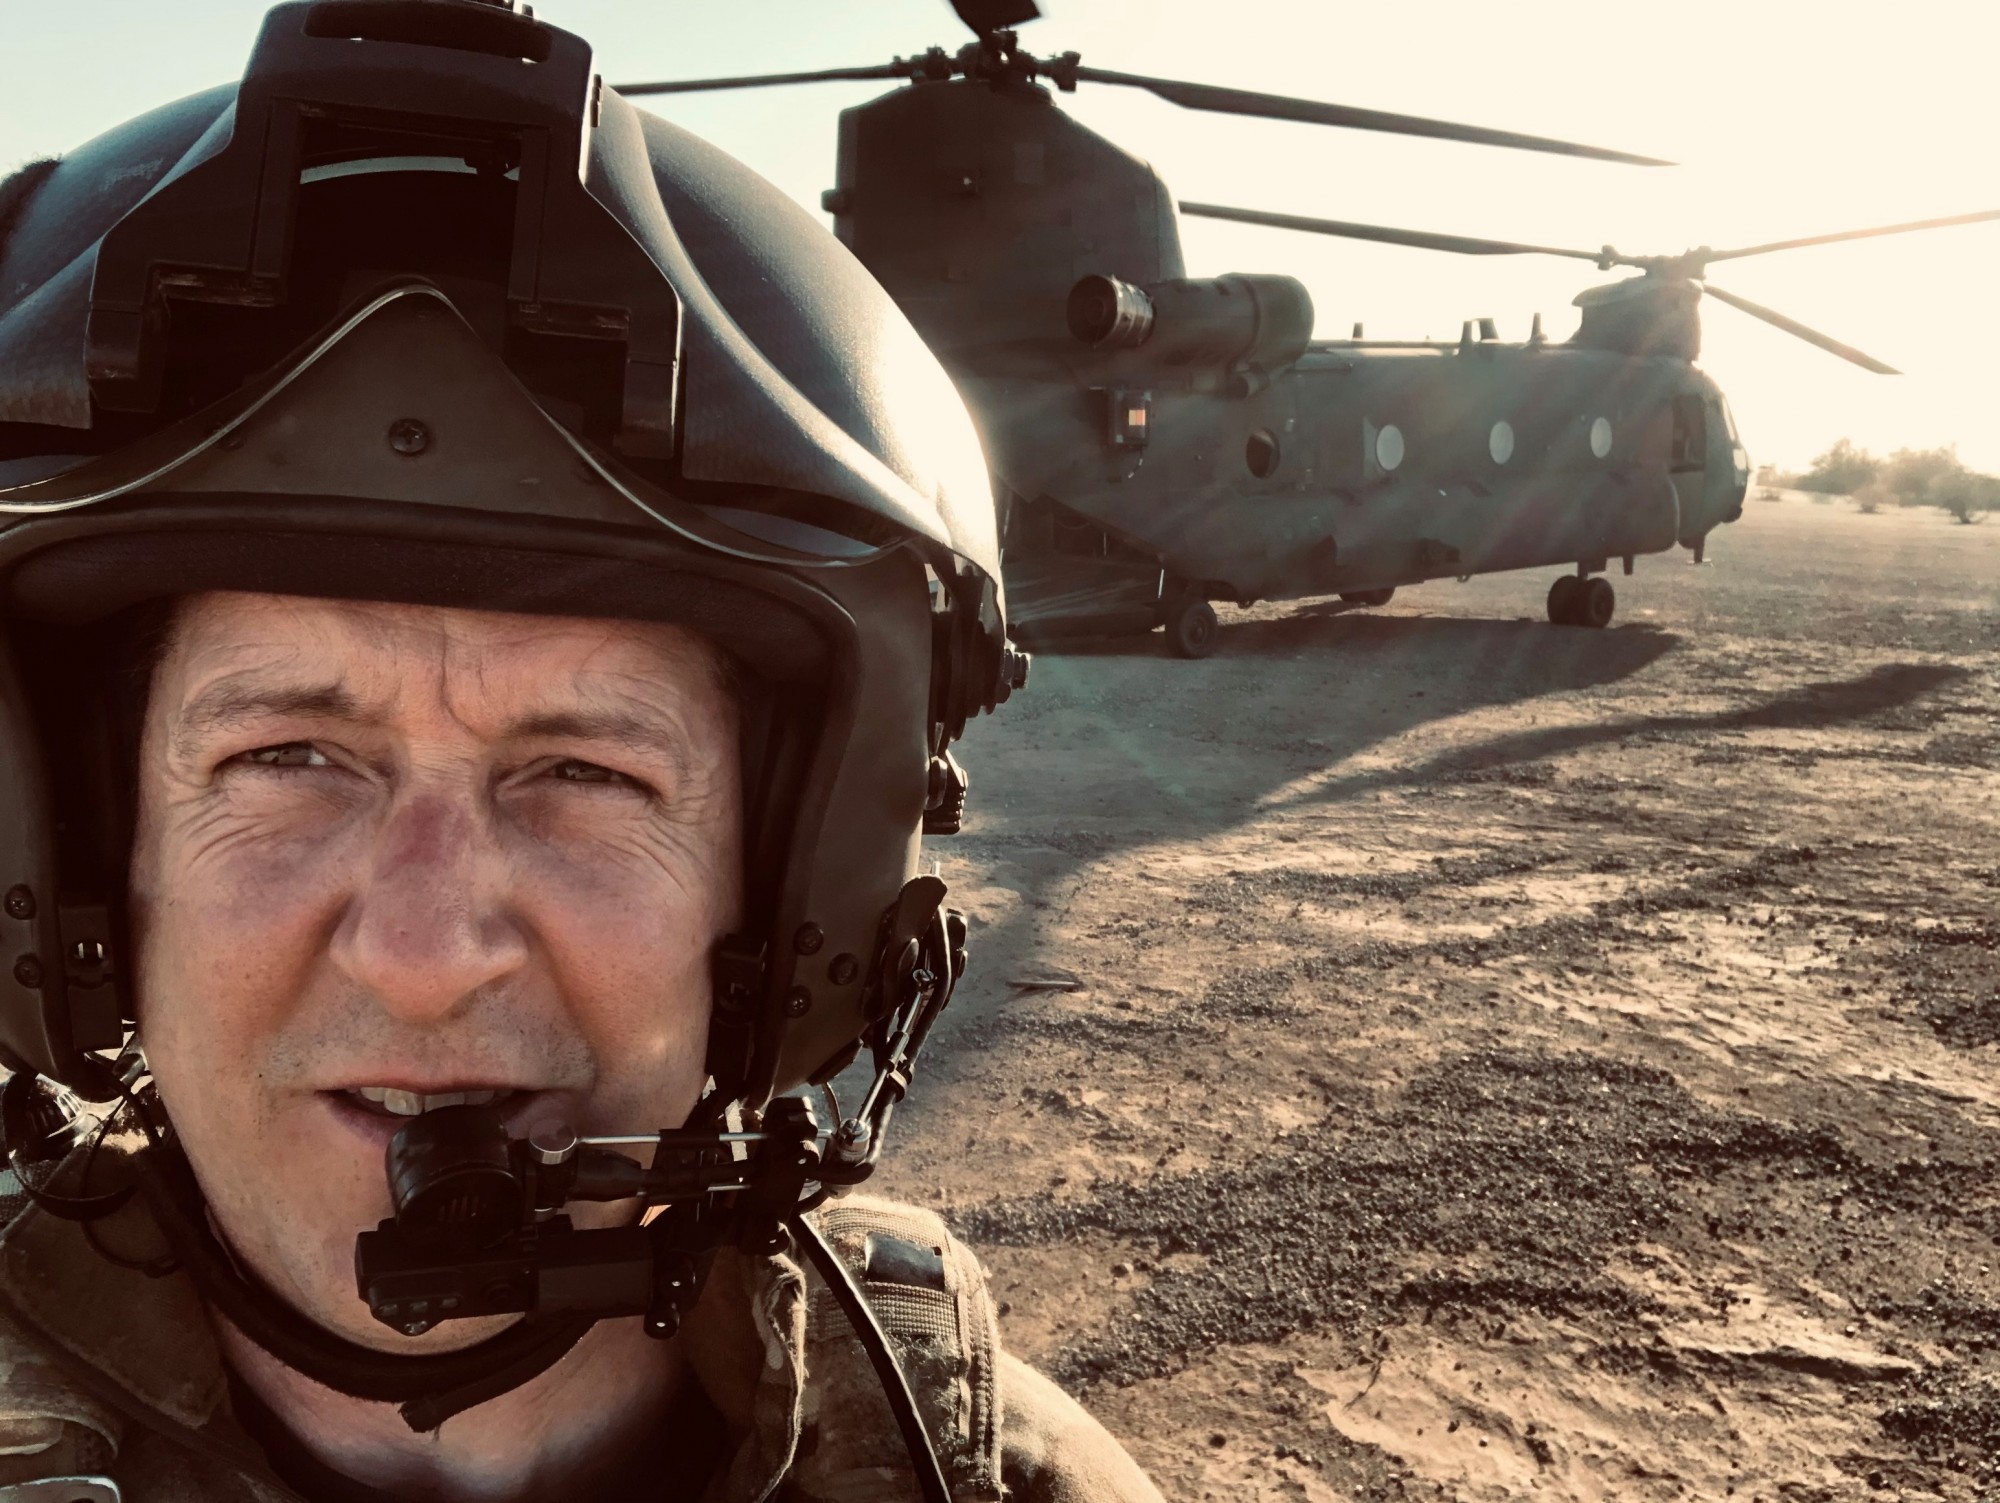 A close up of Ian Swift wearing a helmet with a Chinook helicopter behind him the desert